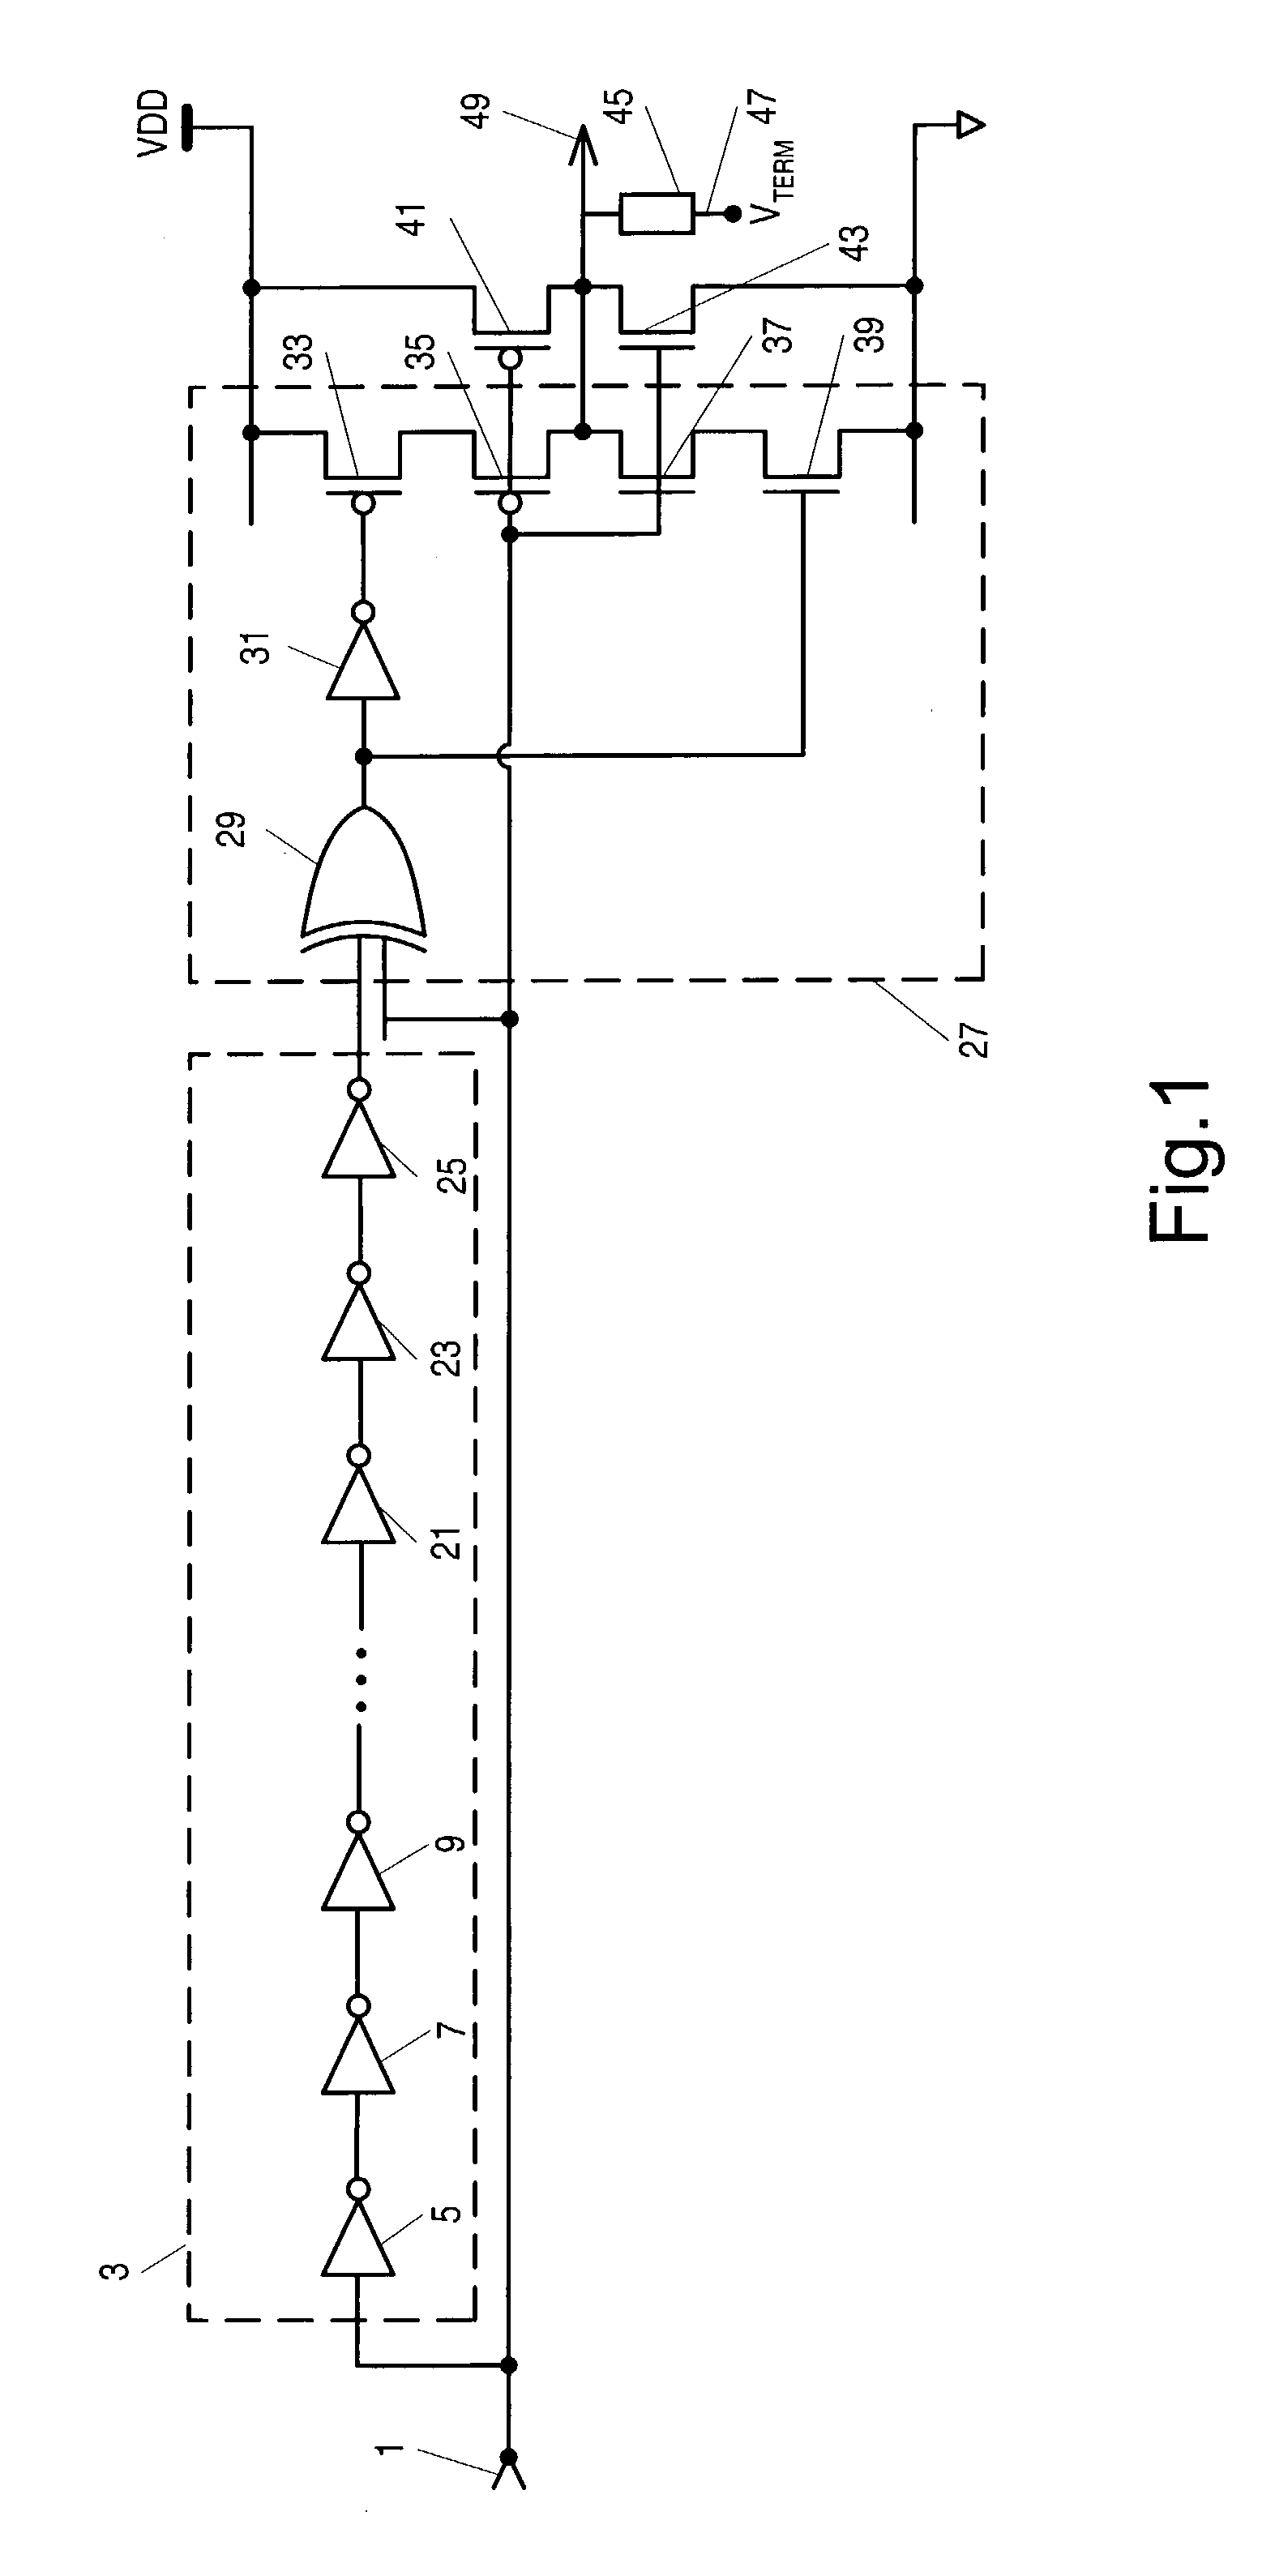 Line driver with reduced power consumption